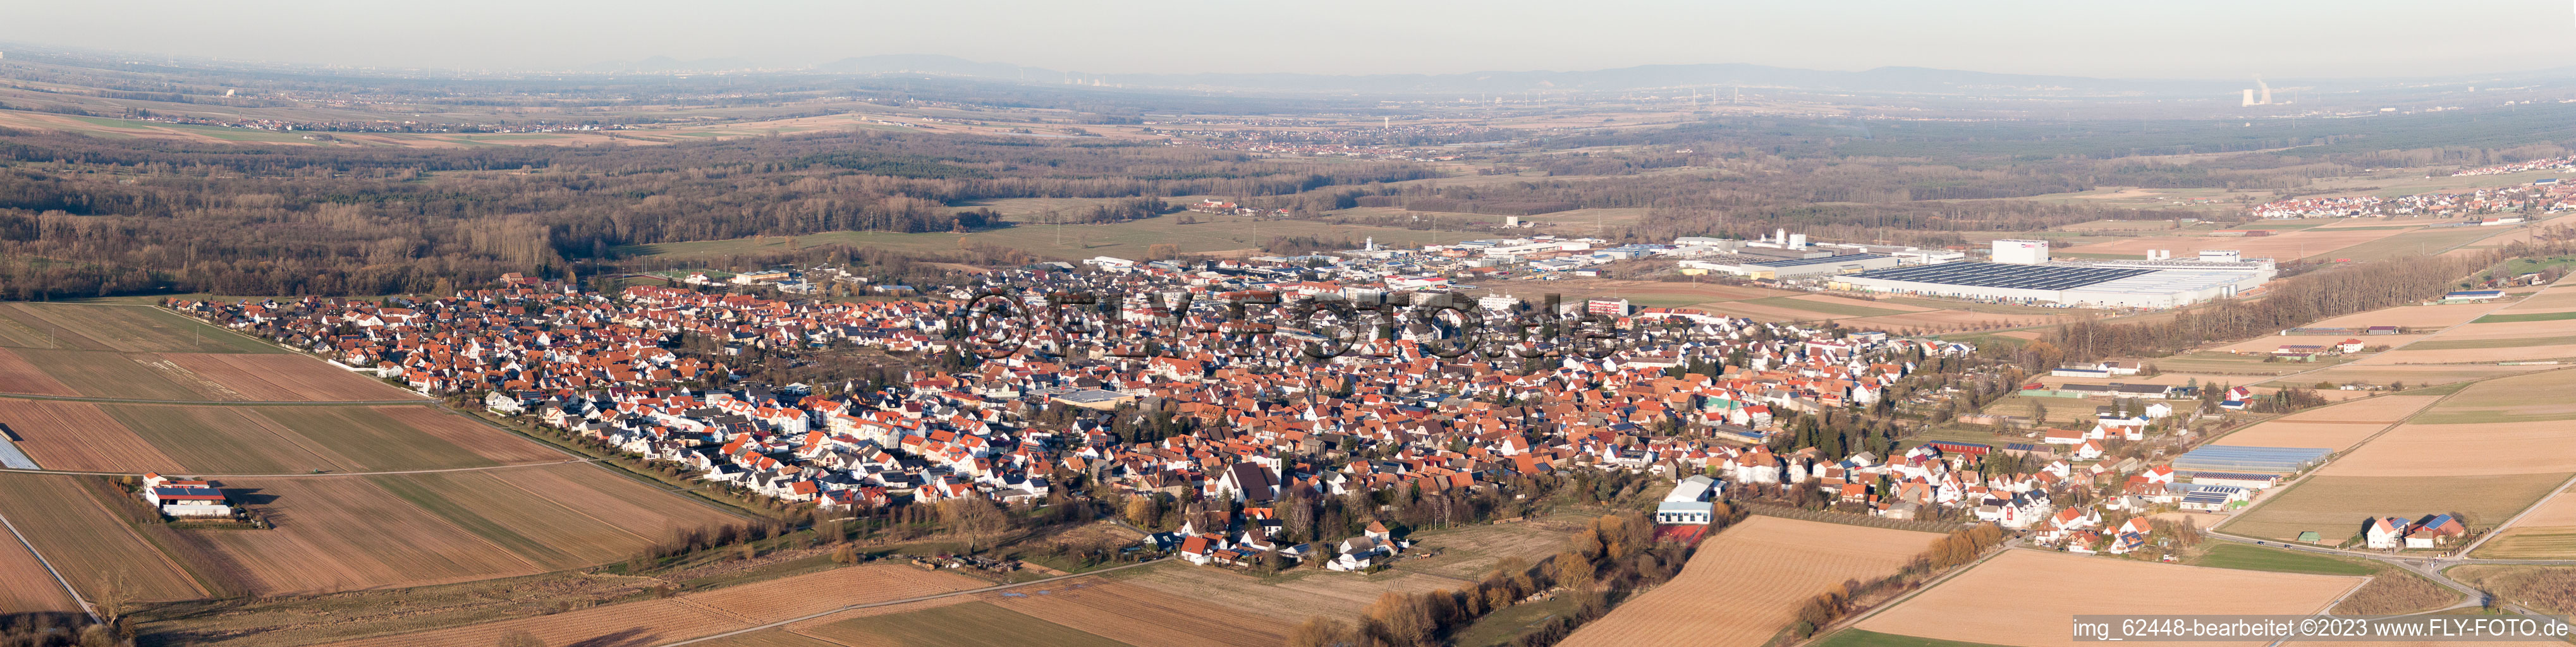 Aerial photograpy of Panorama in Offenbach an der Queich in the state Rhineland-Palatinate, Germany